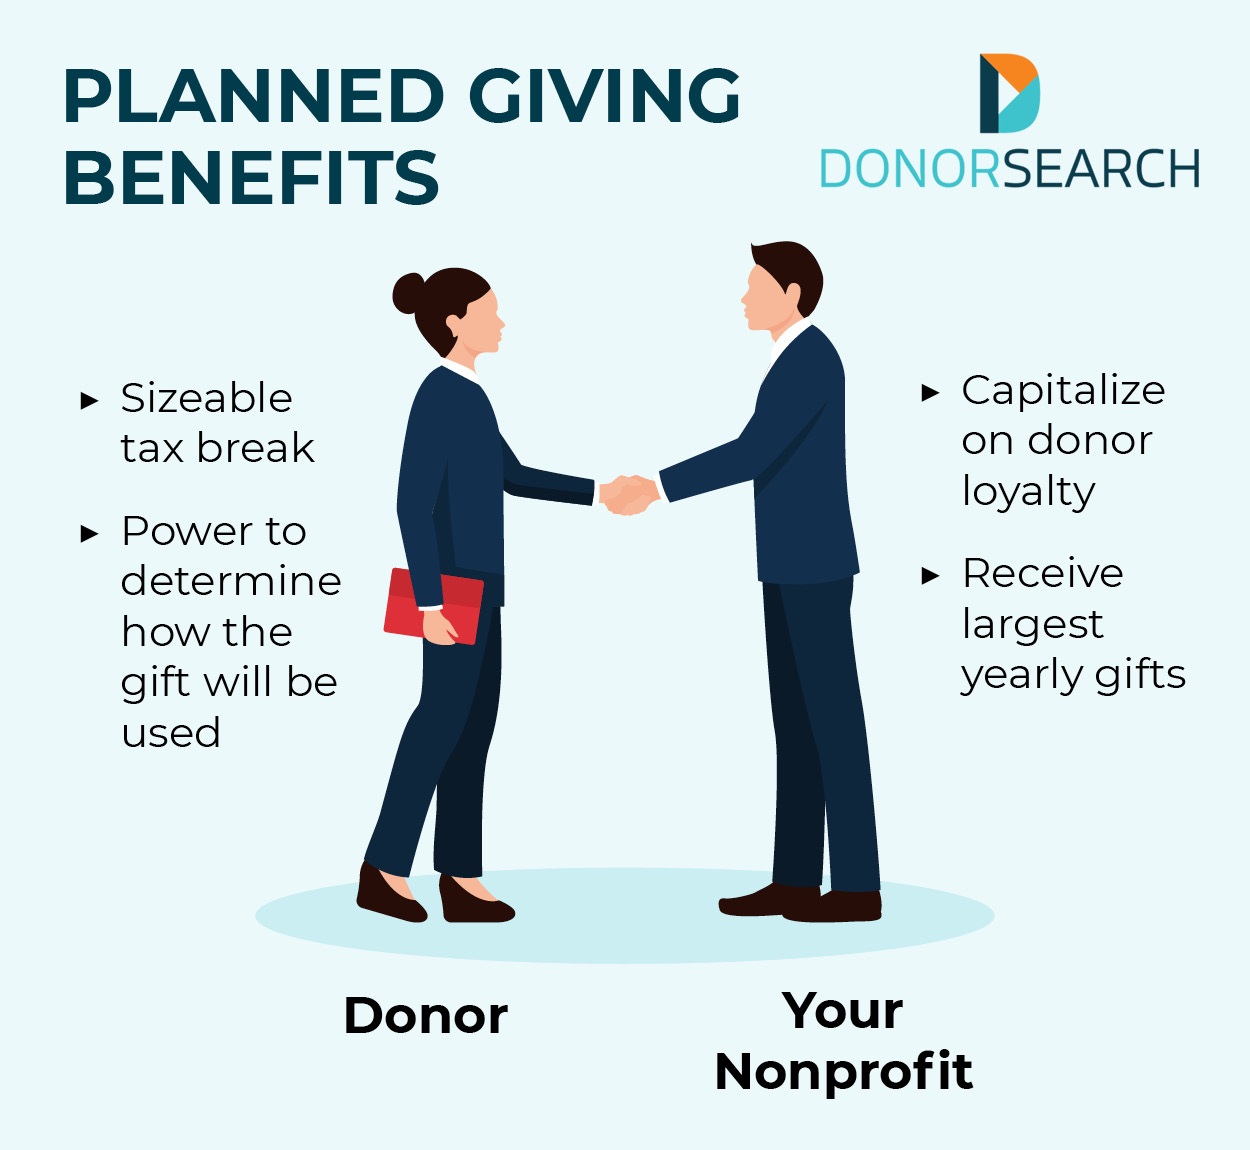 This image and the text below lay out the benefits of planned giving for donors and nonprofits.